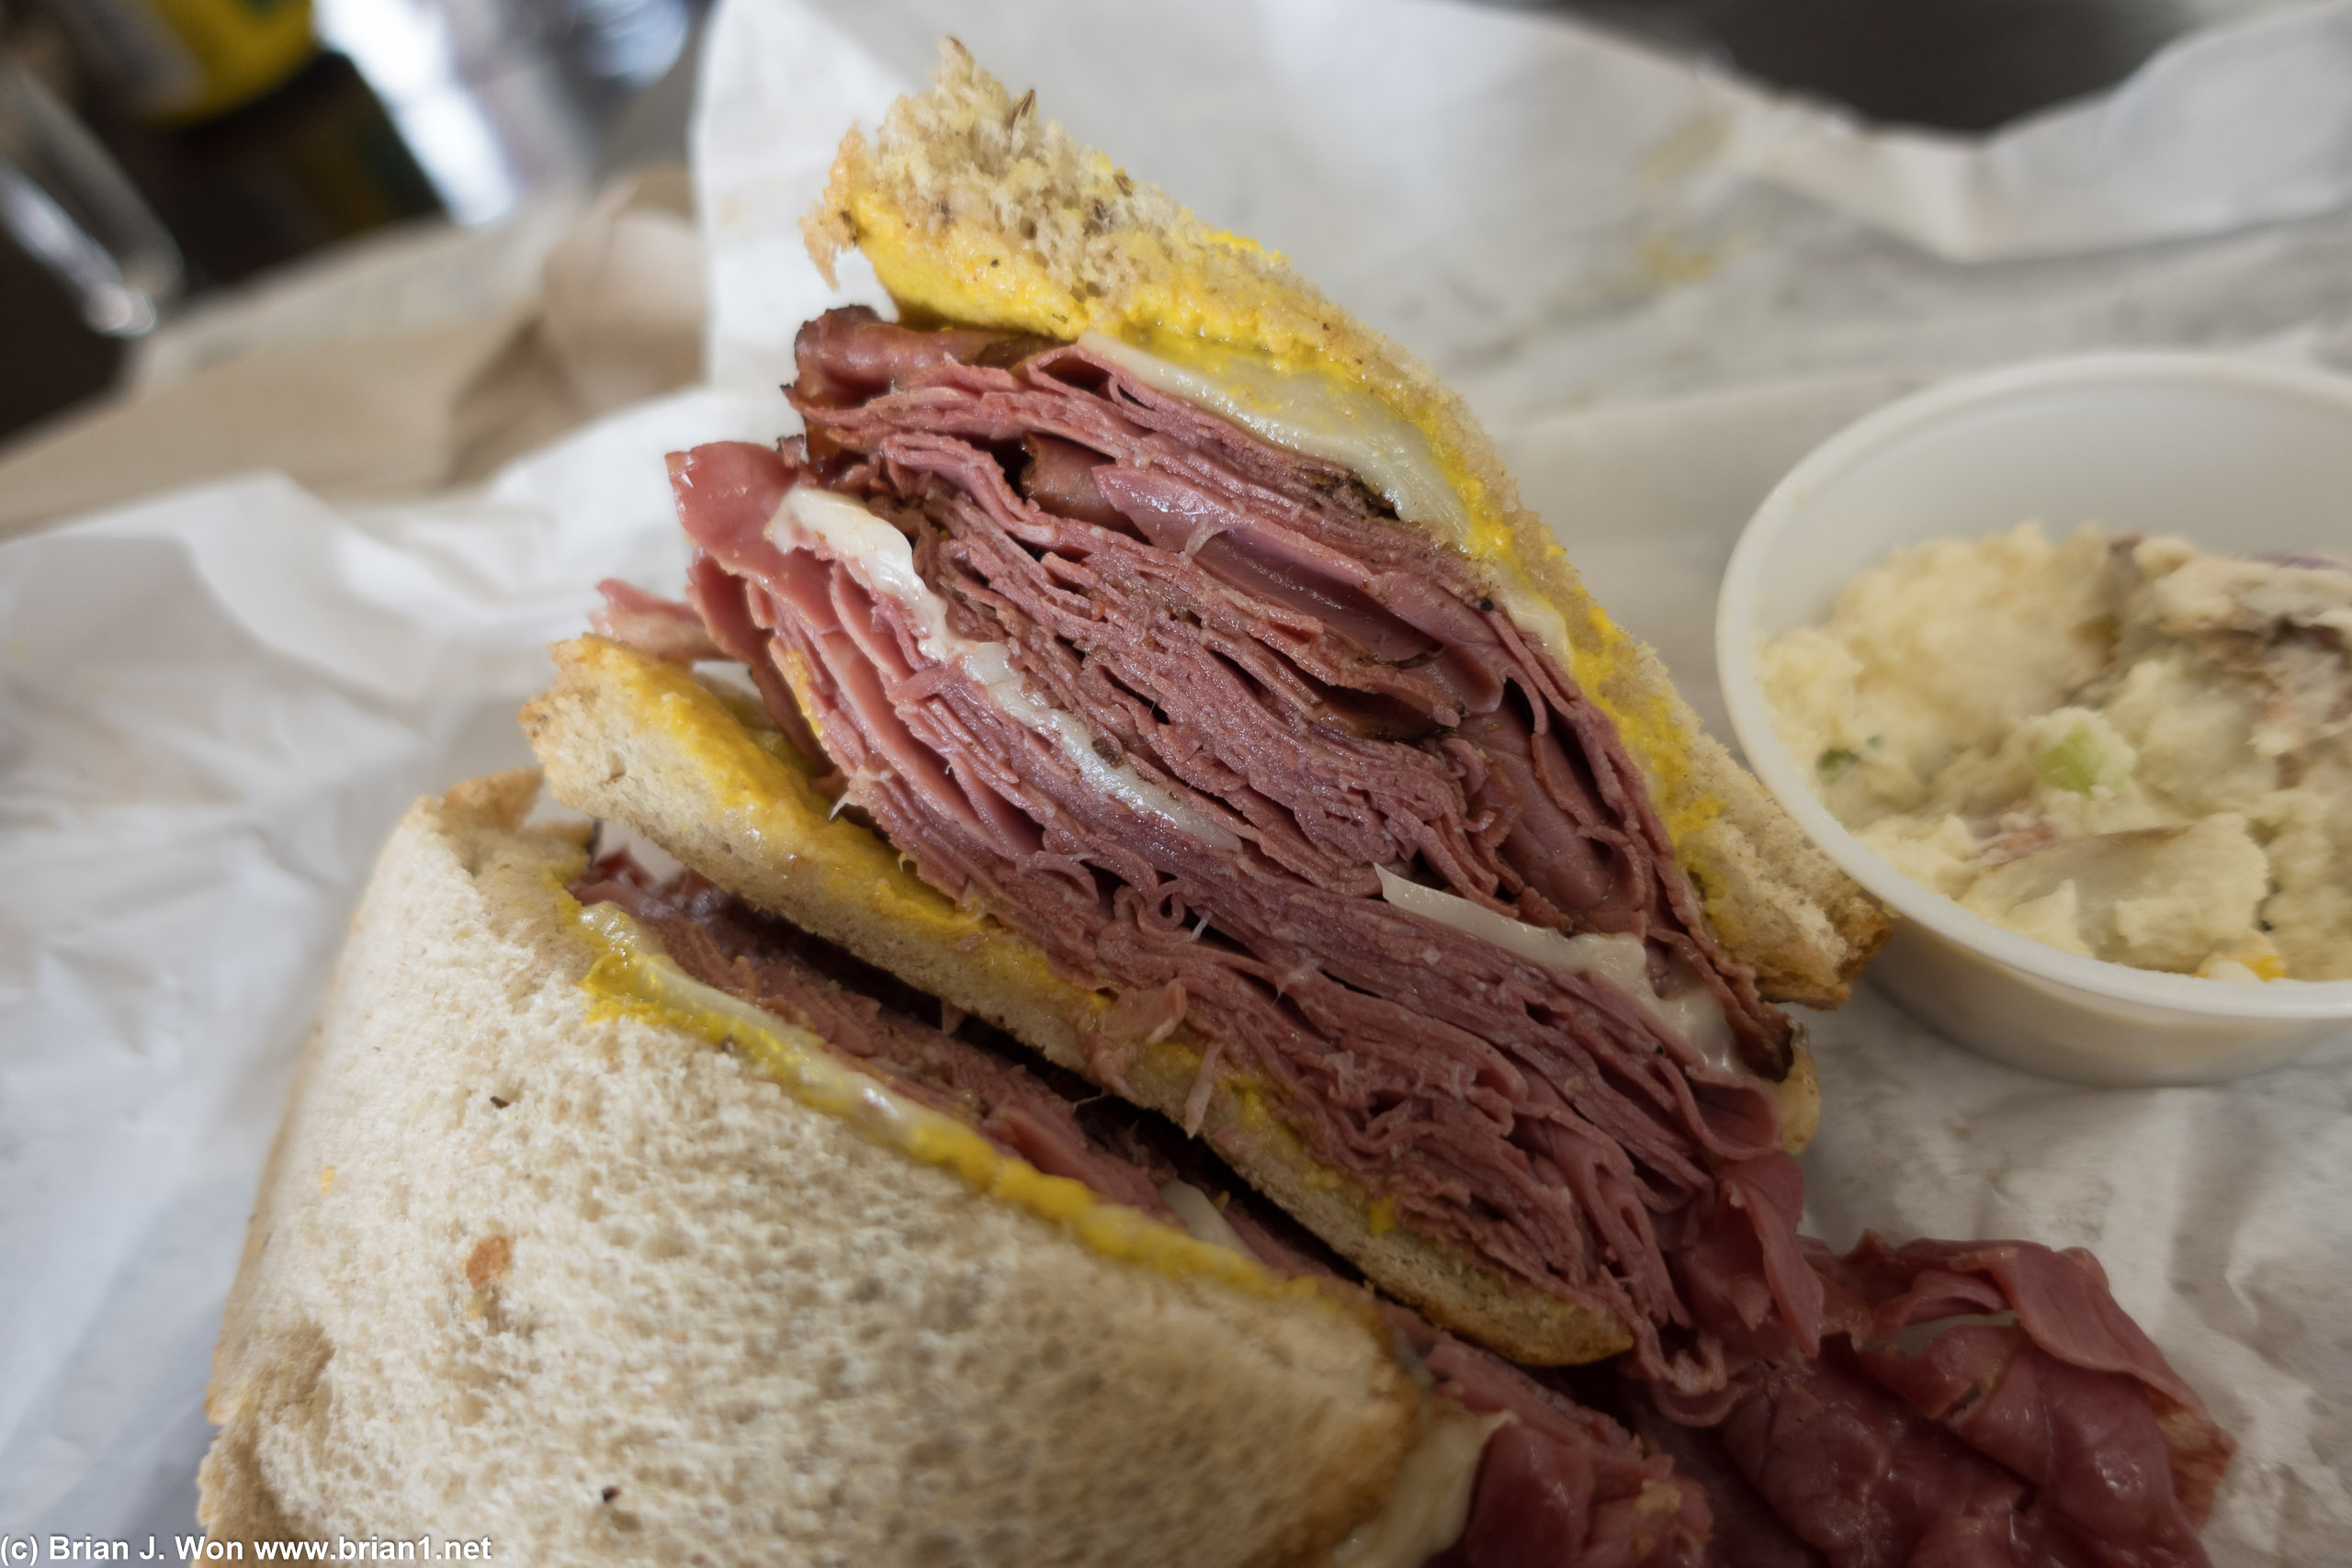 The Stroke: 3/4th pound hot corned beef and pastrami with swiss and mustard.